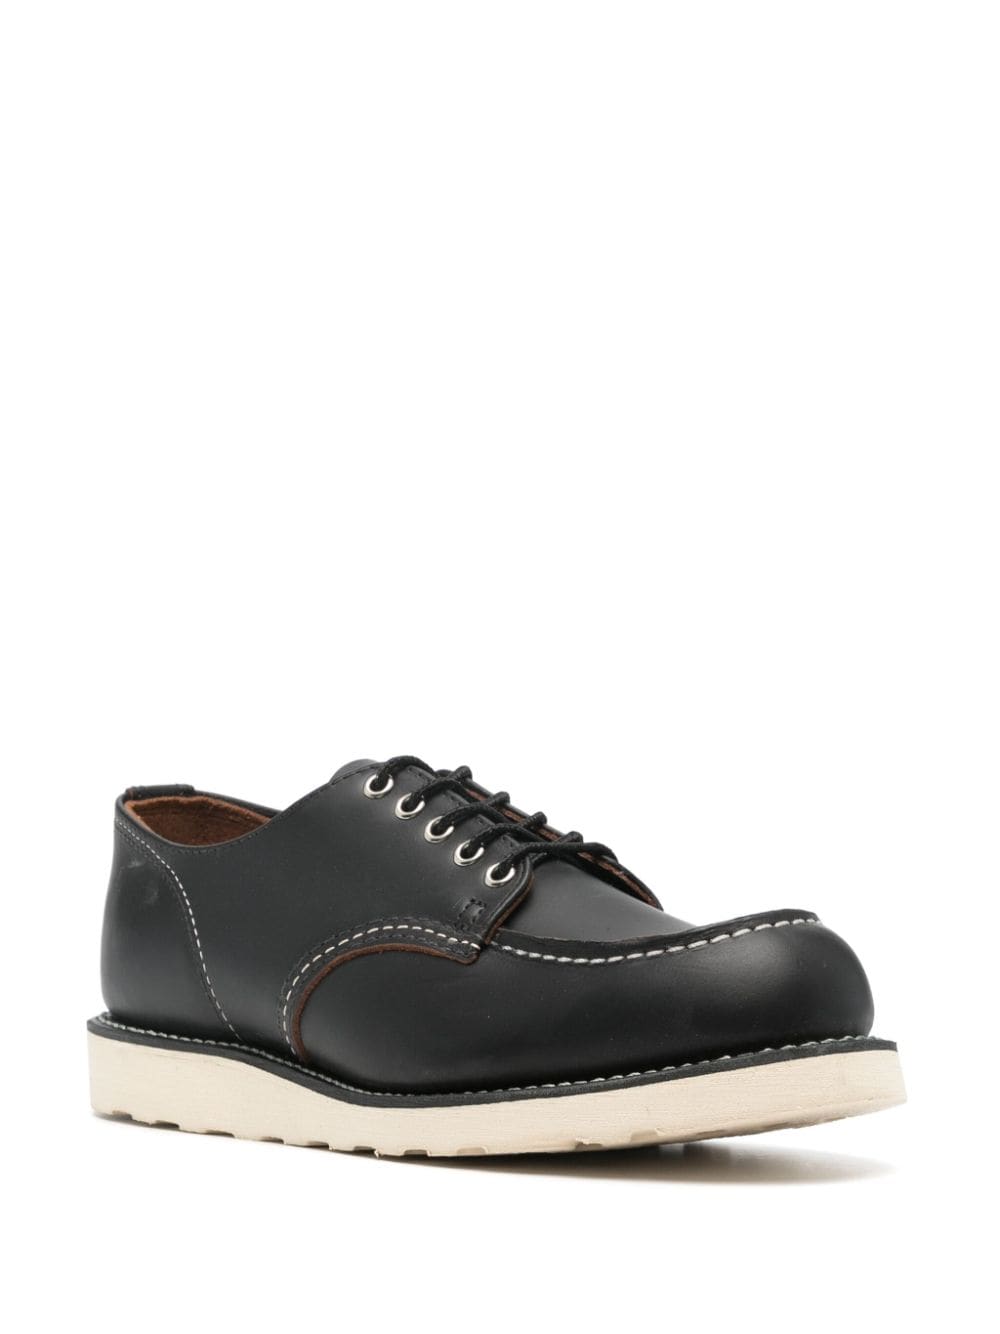 Red Wing Shoes Shop Moc Oxford derby shoes - Zwart